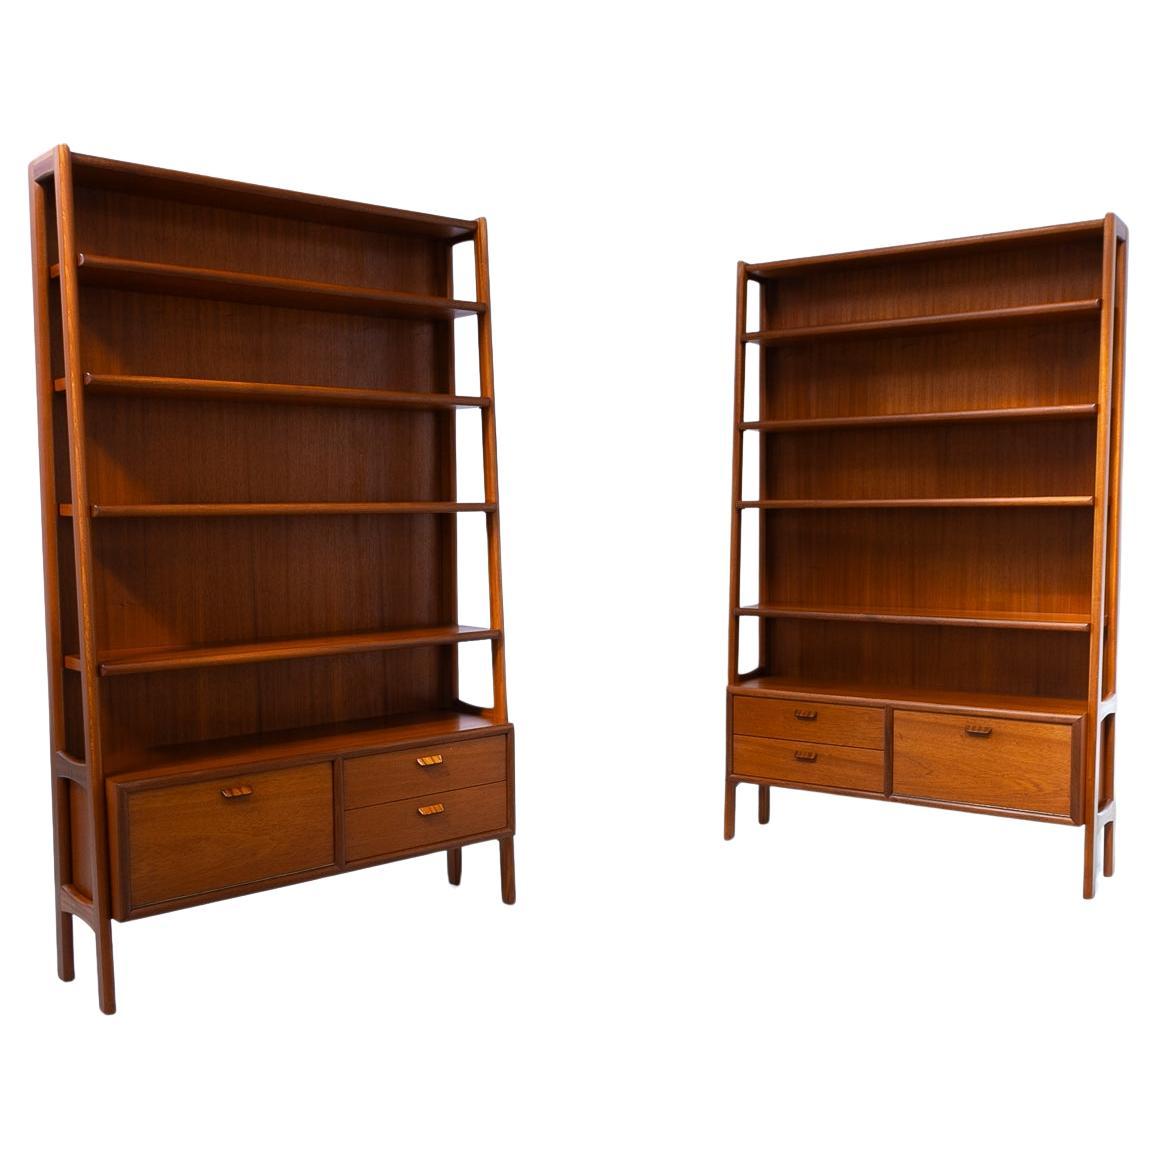 Danish Modern Mahogany Bookcases, 1960s. Set of 2. For Sale